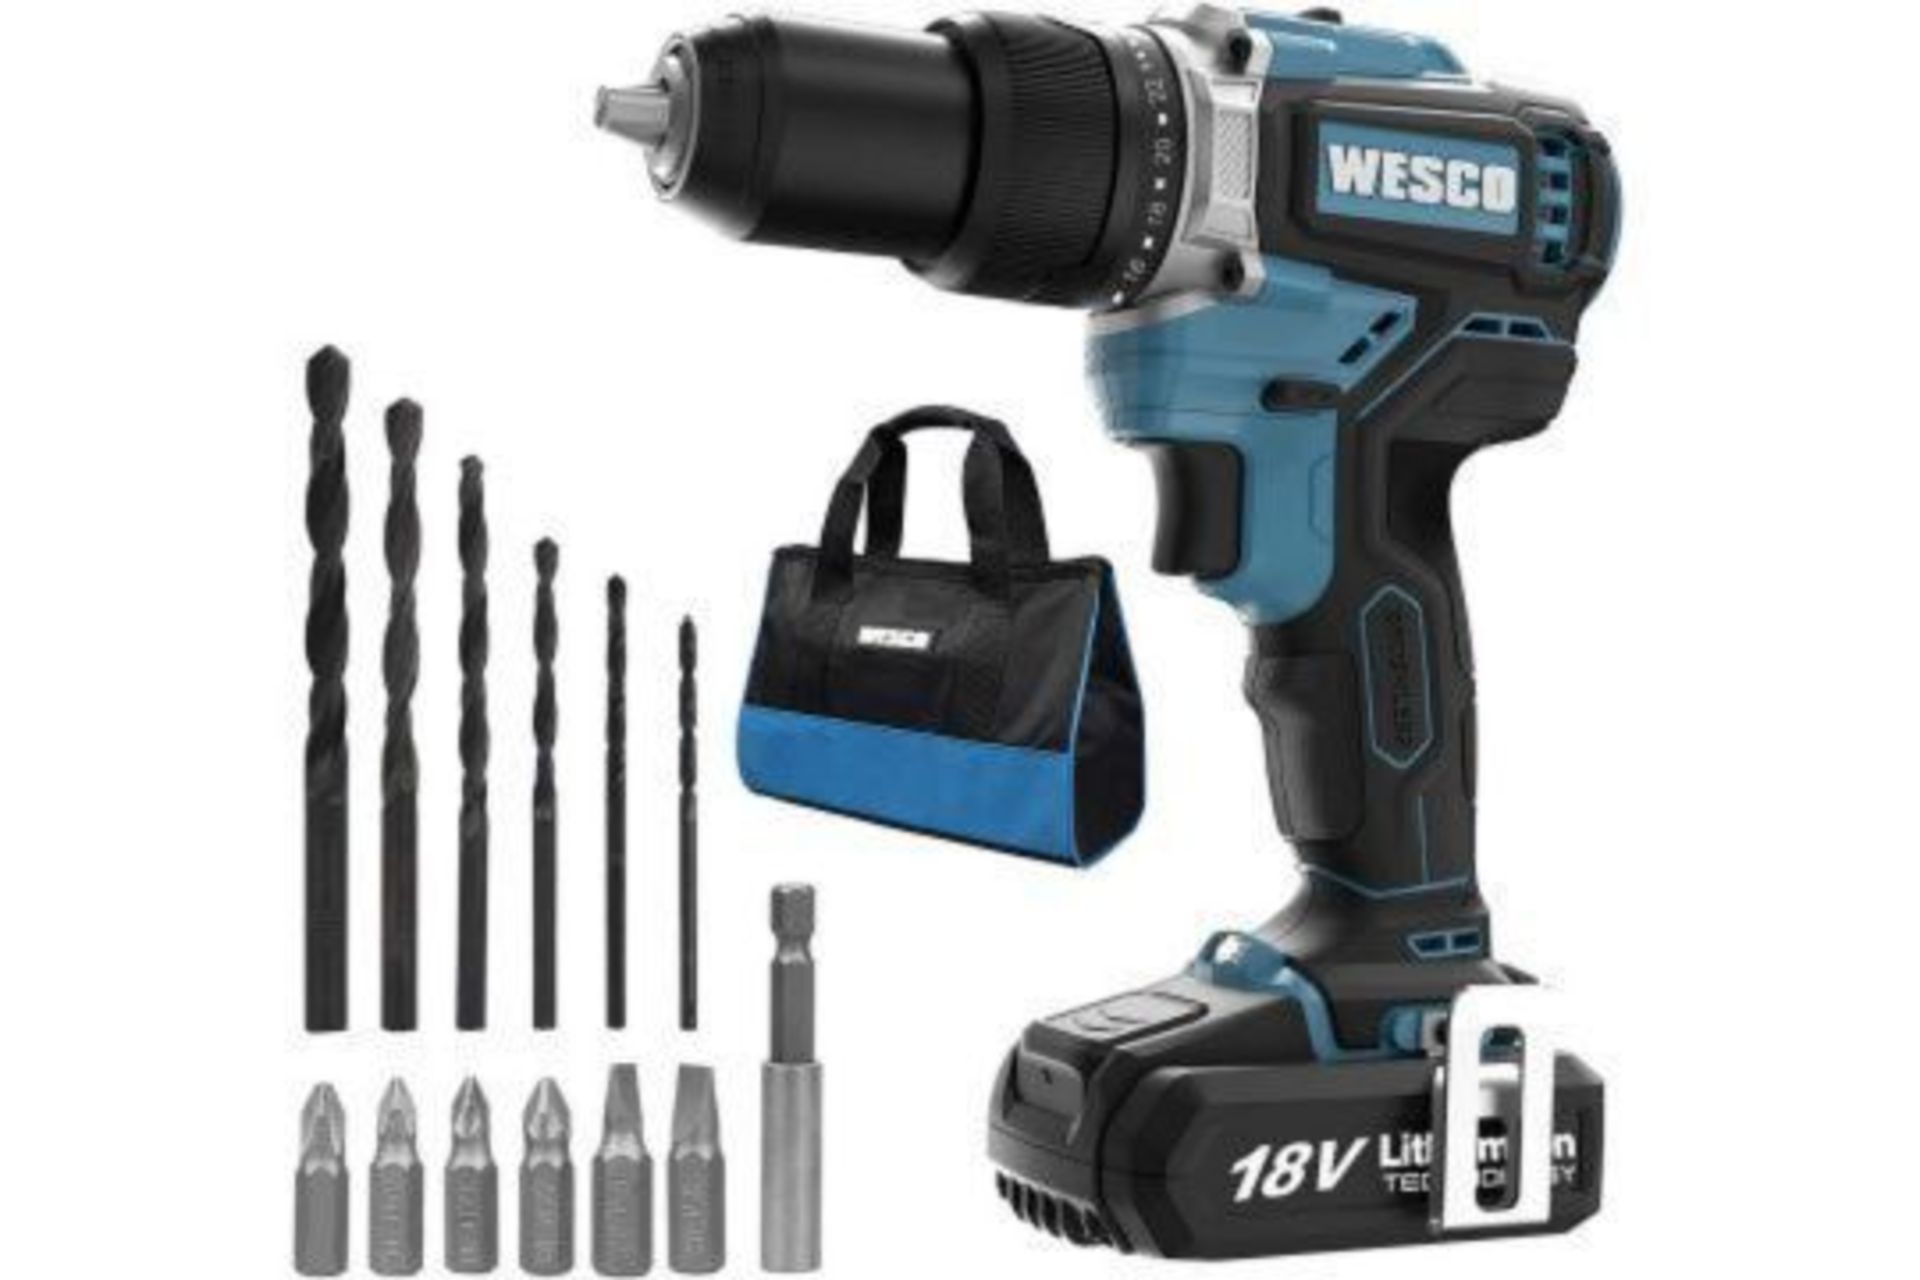 TRADE LOT 4 X NEW BOXED WESCO Brushless Cordless Drill, WESCO 18V 2.0Ah Cordless Combi Drill with 13